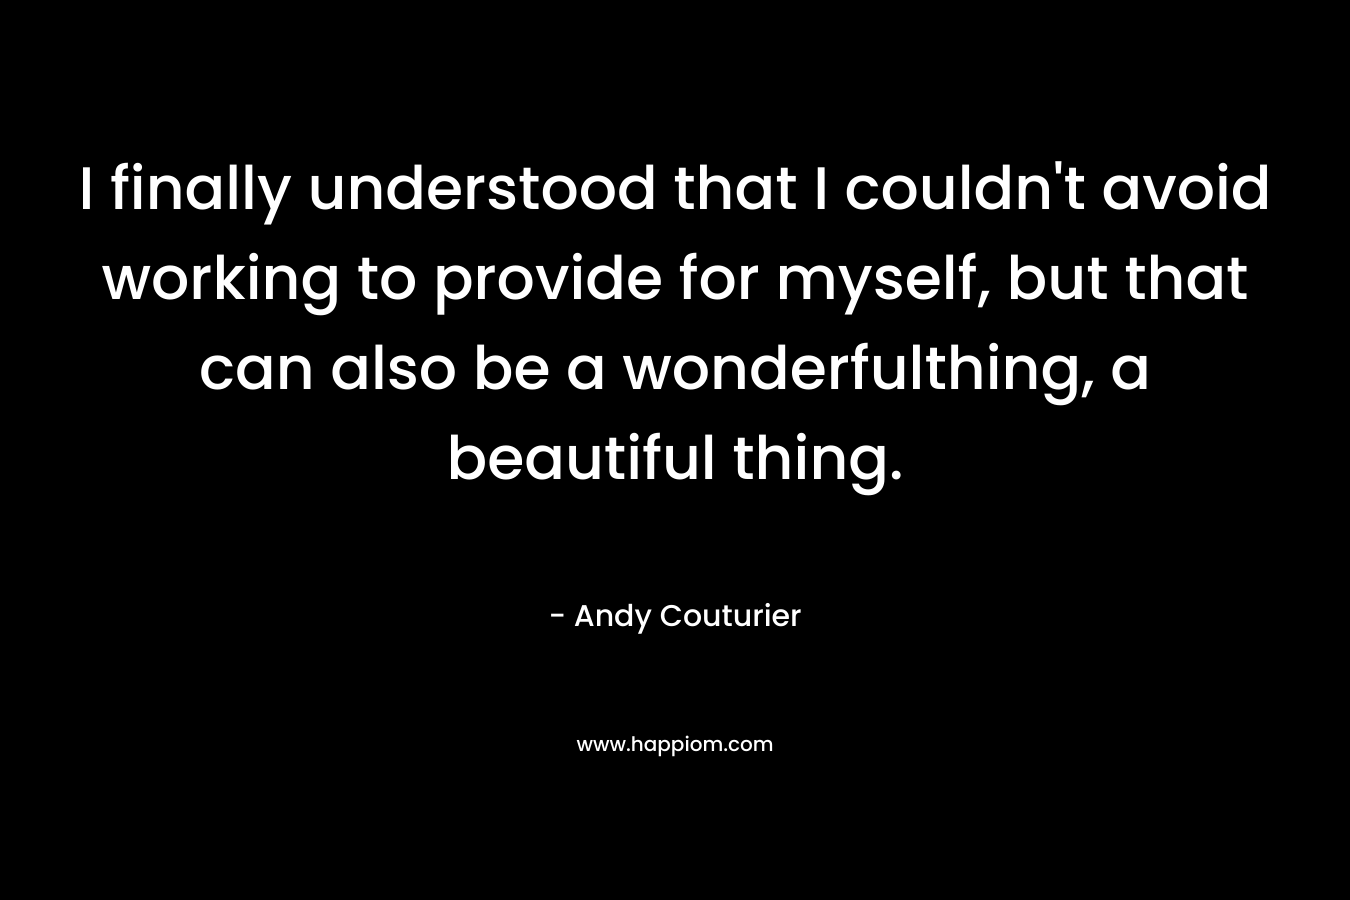 I finally understood that I couldn’t avoid working to provide for myself, but that can also be a wonderfulthing, a beautiful thing. – Andy Couturier